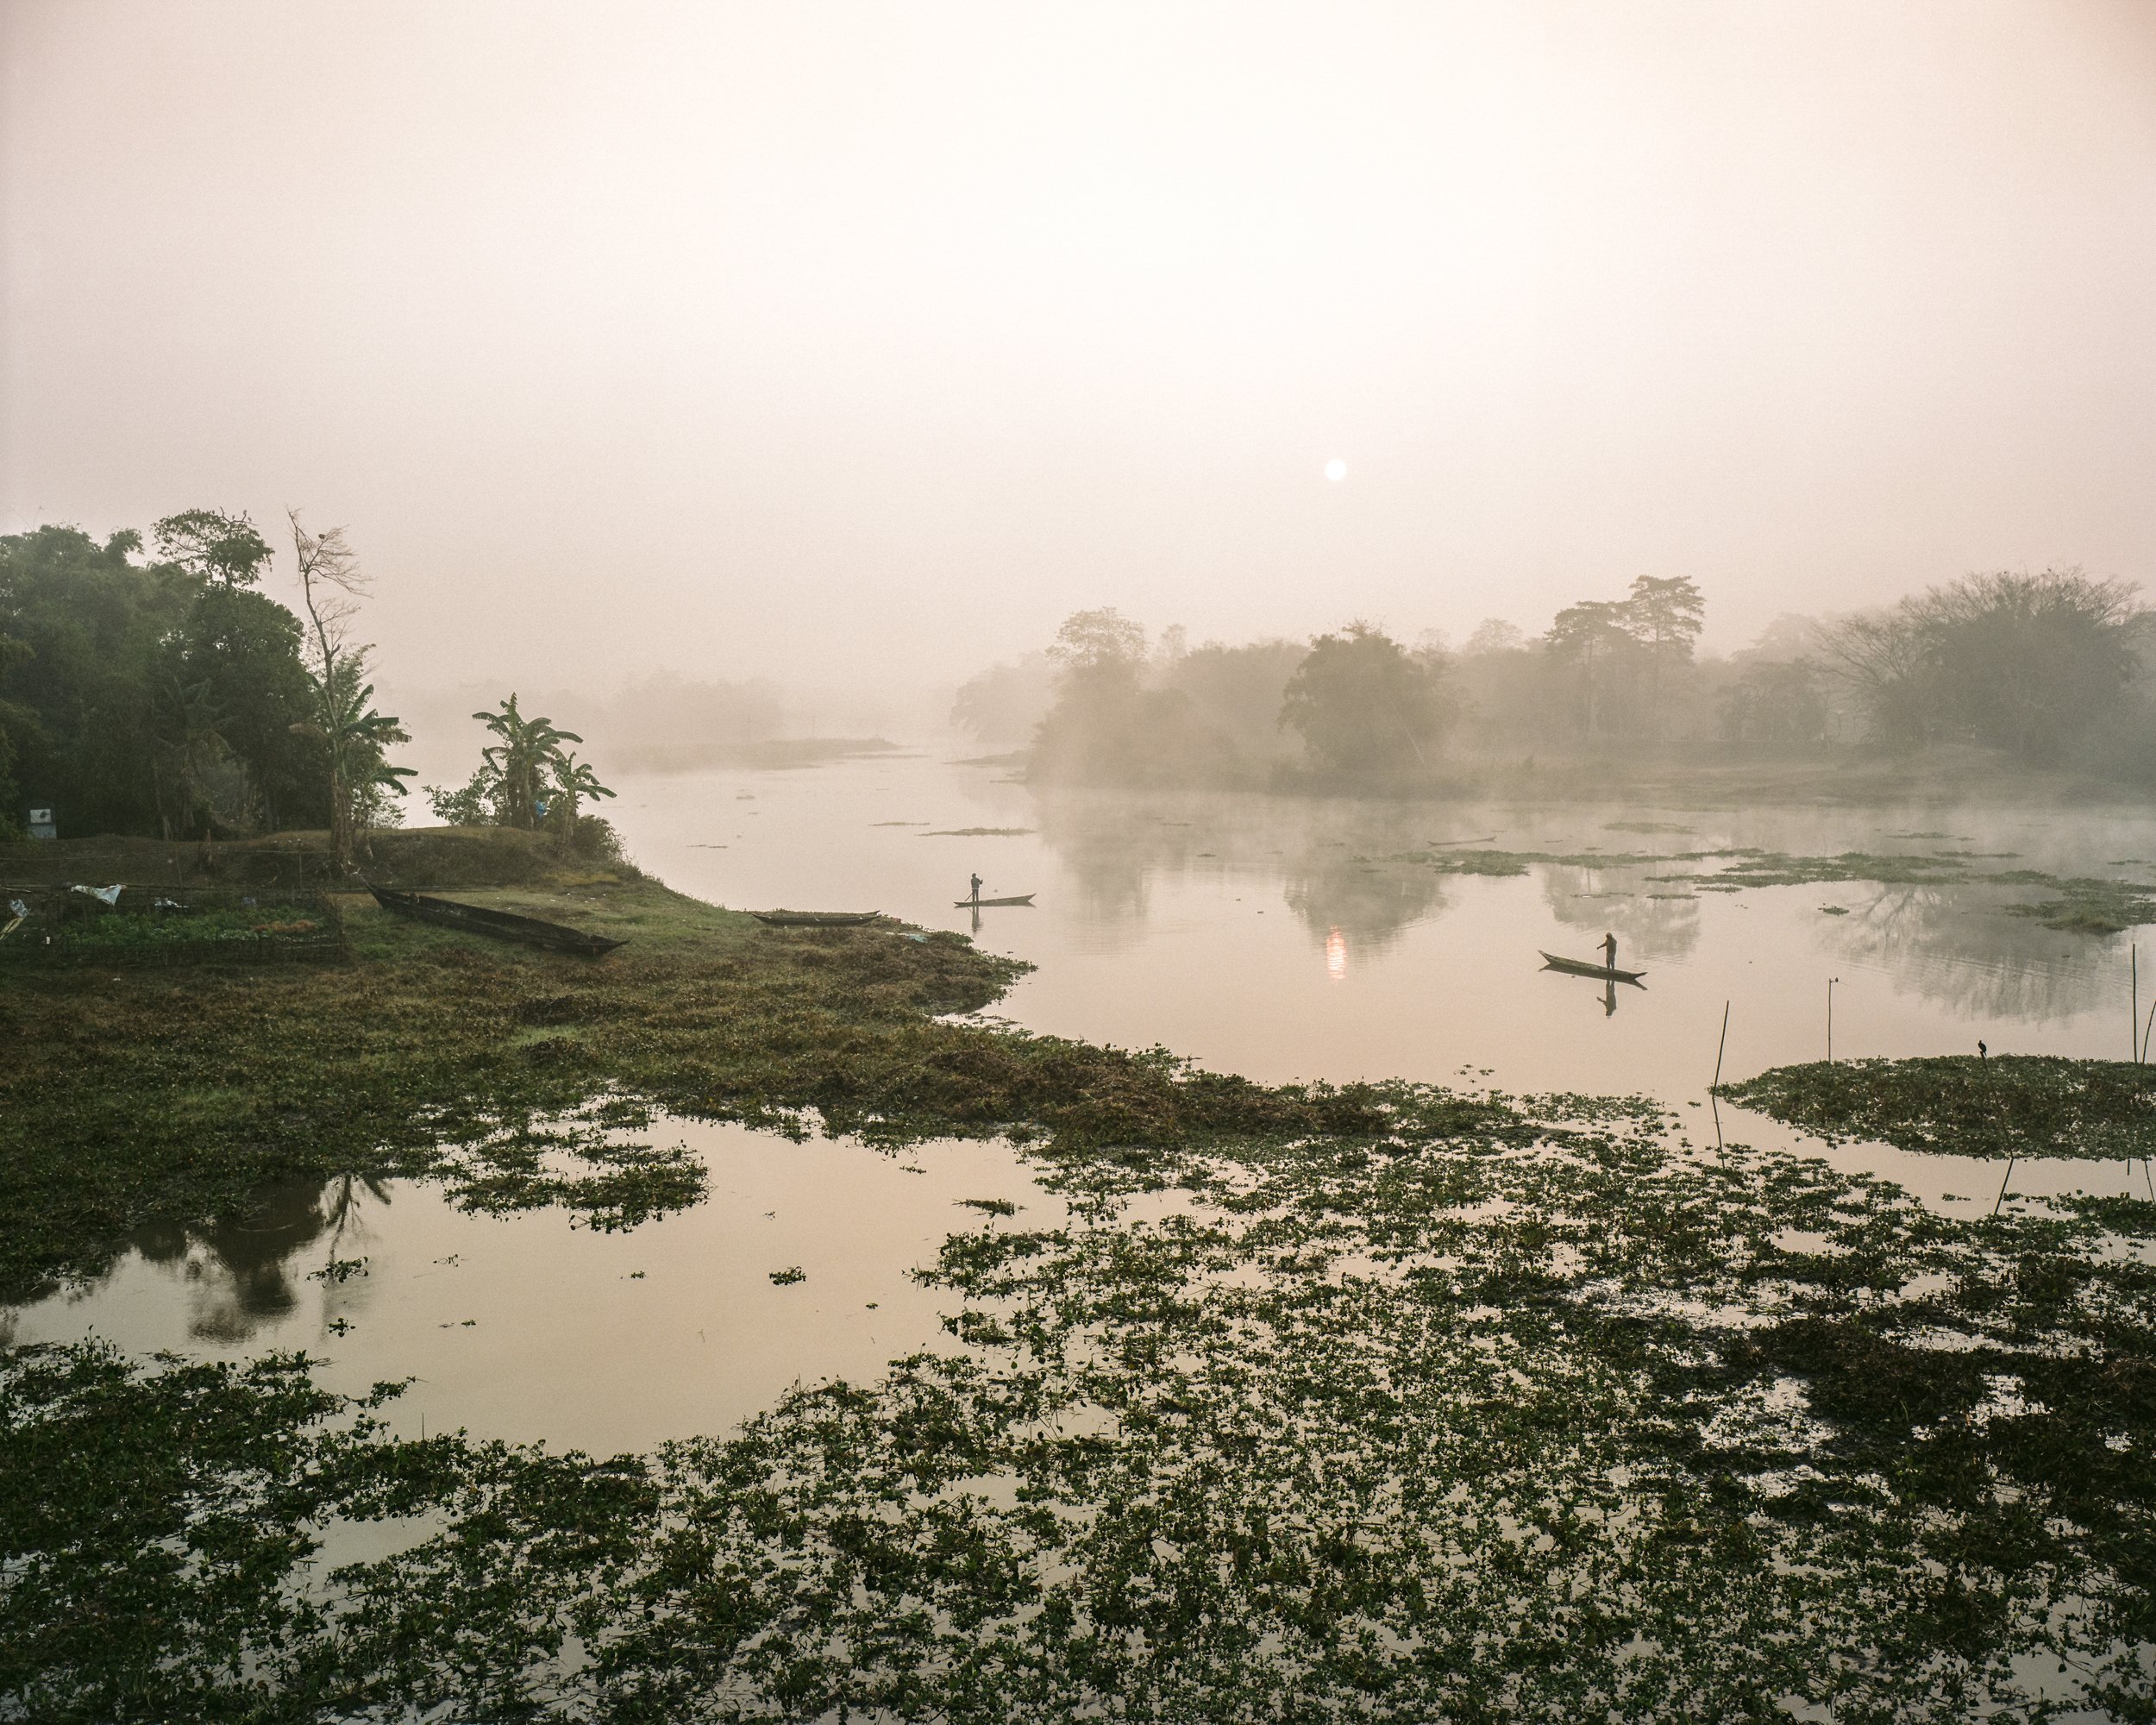   Morning view of inland swamp lakes in Majuli between the two biggest village Gara- mur and Kamalabari. Humans and environment have been in dynamic relationship on the island for a long time ago. People adapted to the river’s annual rhythm, though, 